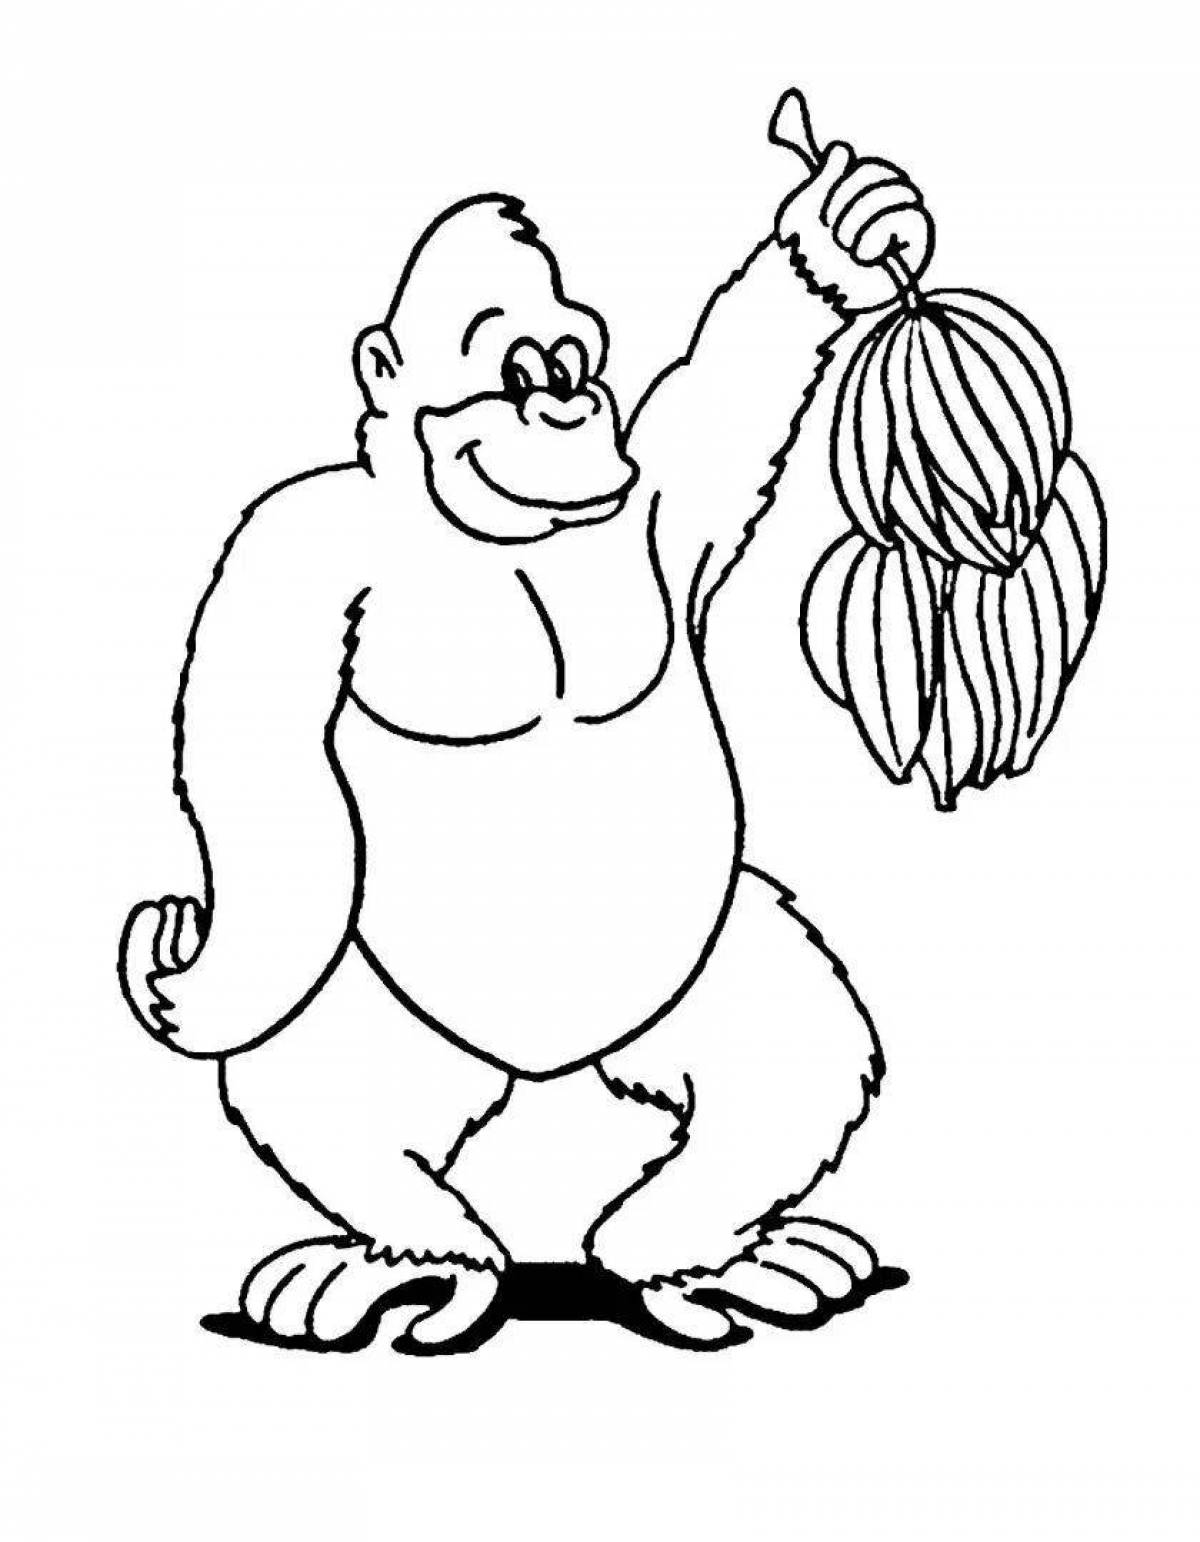 Awesome gorilla coloring pages for kids